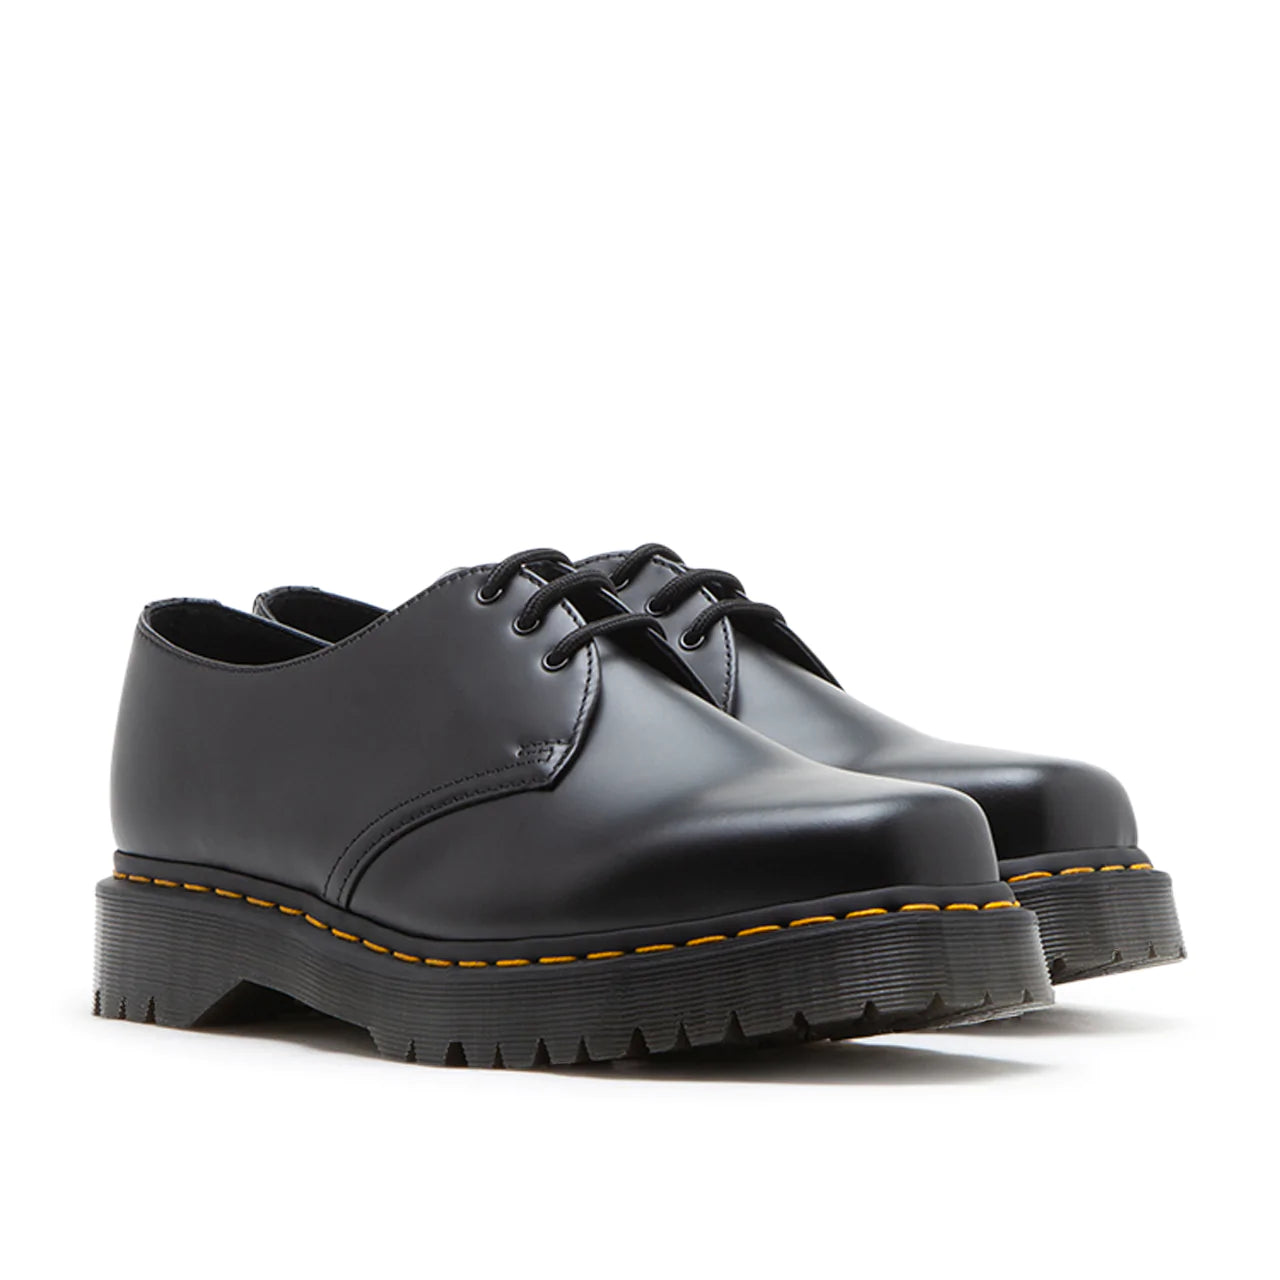 Dr. Martens 1461 Bex Squared Toe Leather Shoes (Schwarz)  - Allike Store